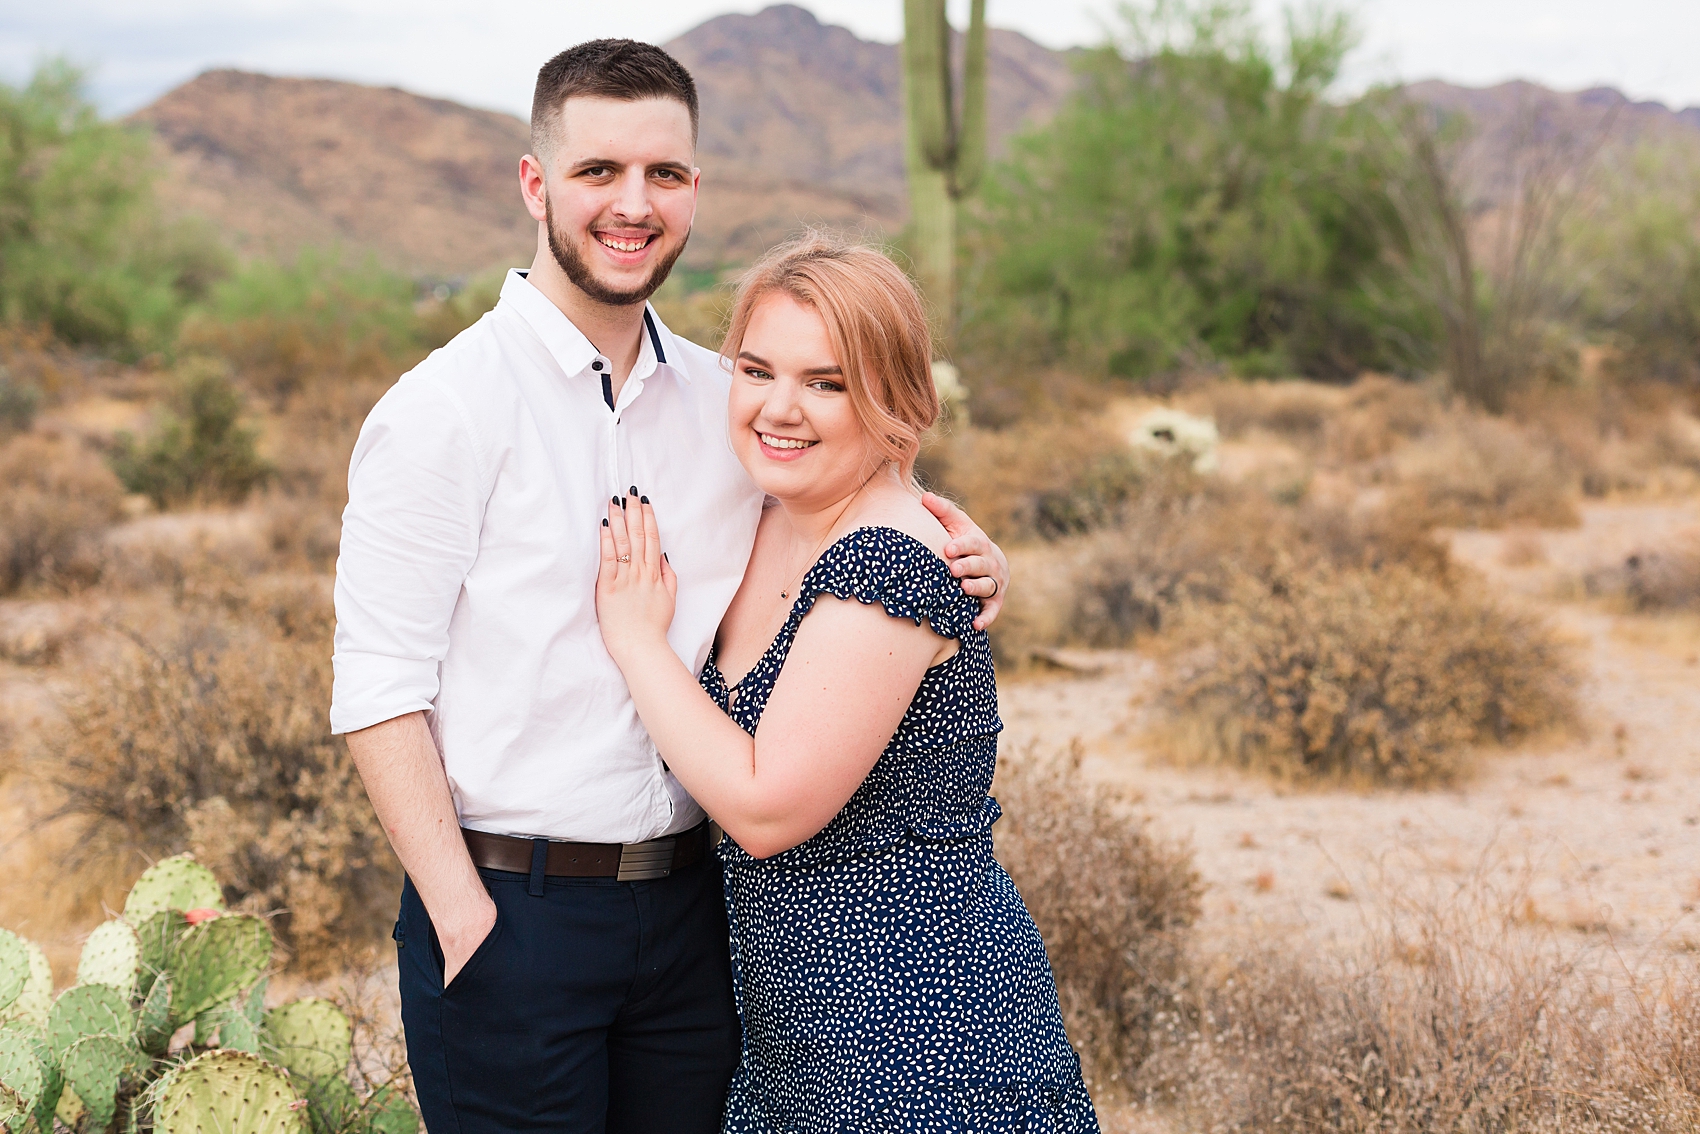 Leah Hope Photography | Scottsdale Cave Creek Phoenix Arizona | Desert Landscape Cactus Scenery | Engagement Pictures | Engaged | Married | In Love | Couples Poses | What to Wear